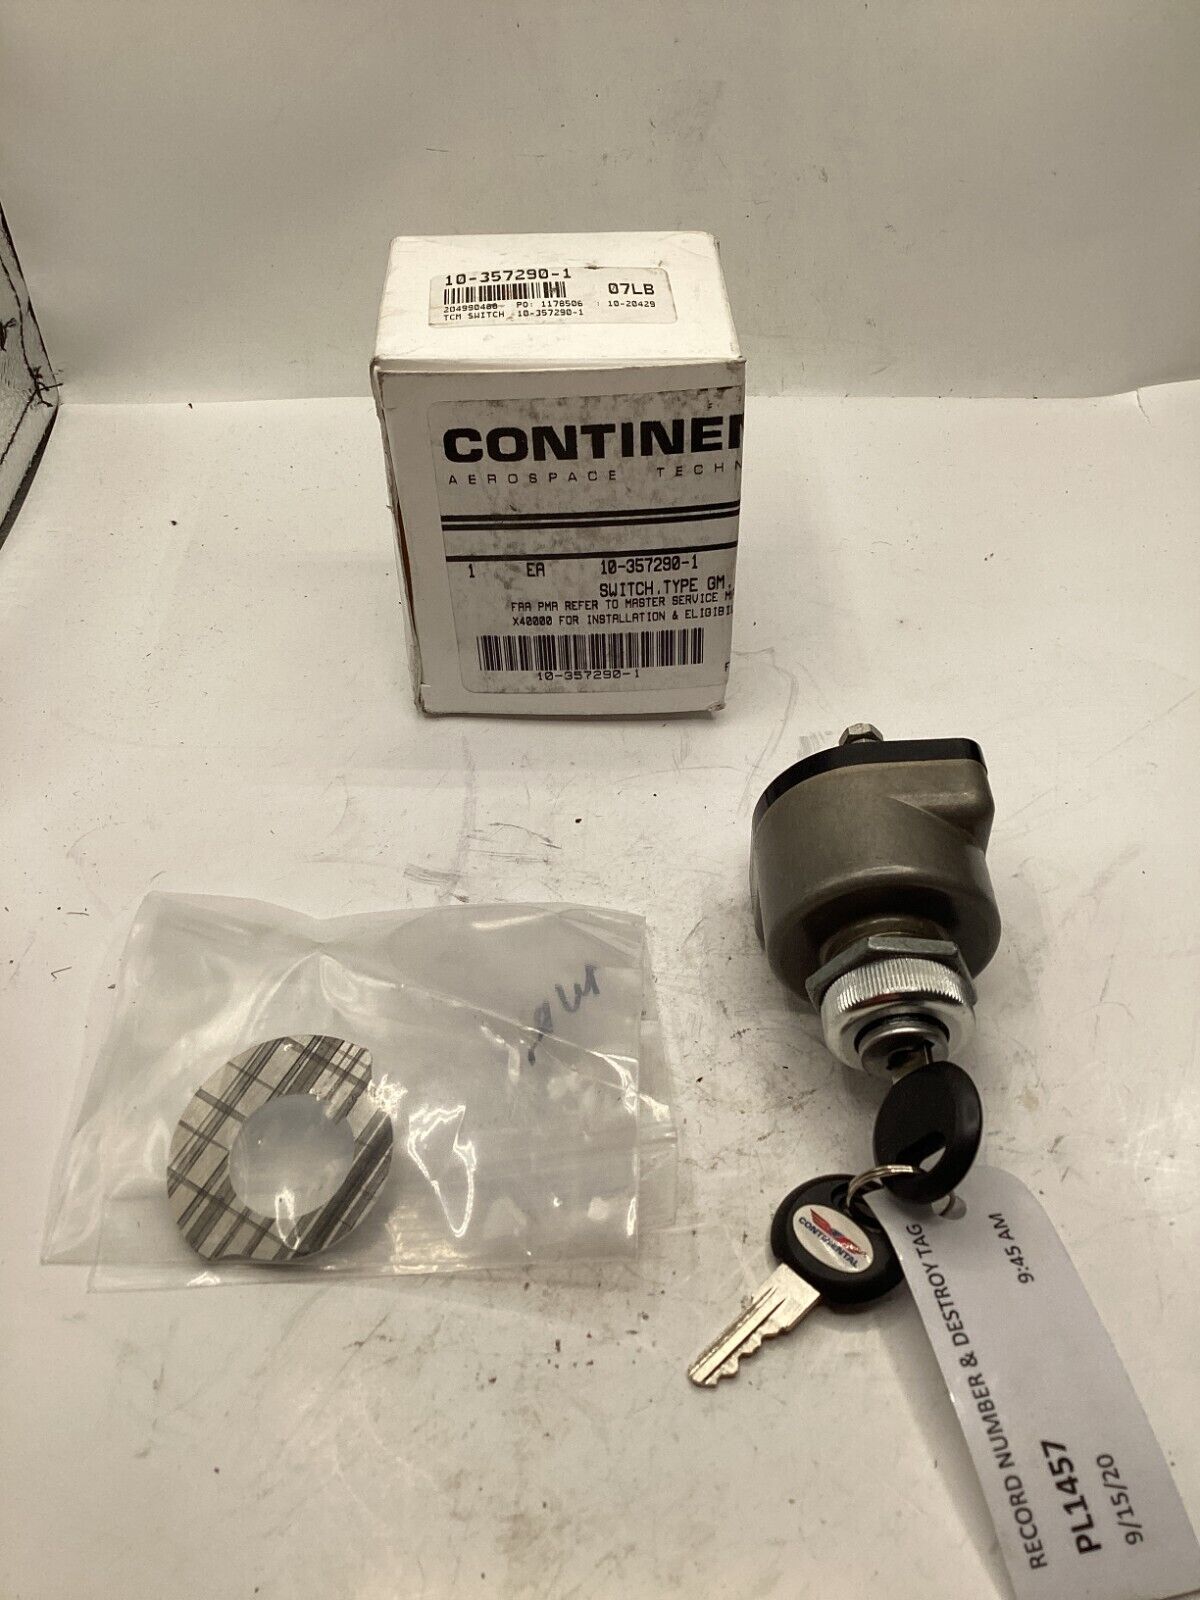 CONTINENTAL Ignition Switch P/N 10-357290-1